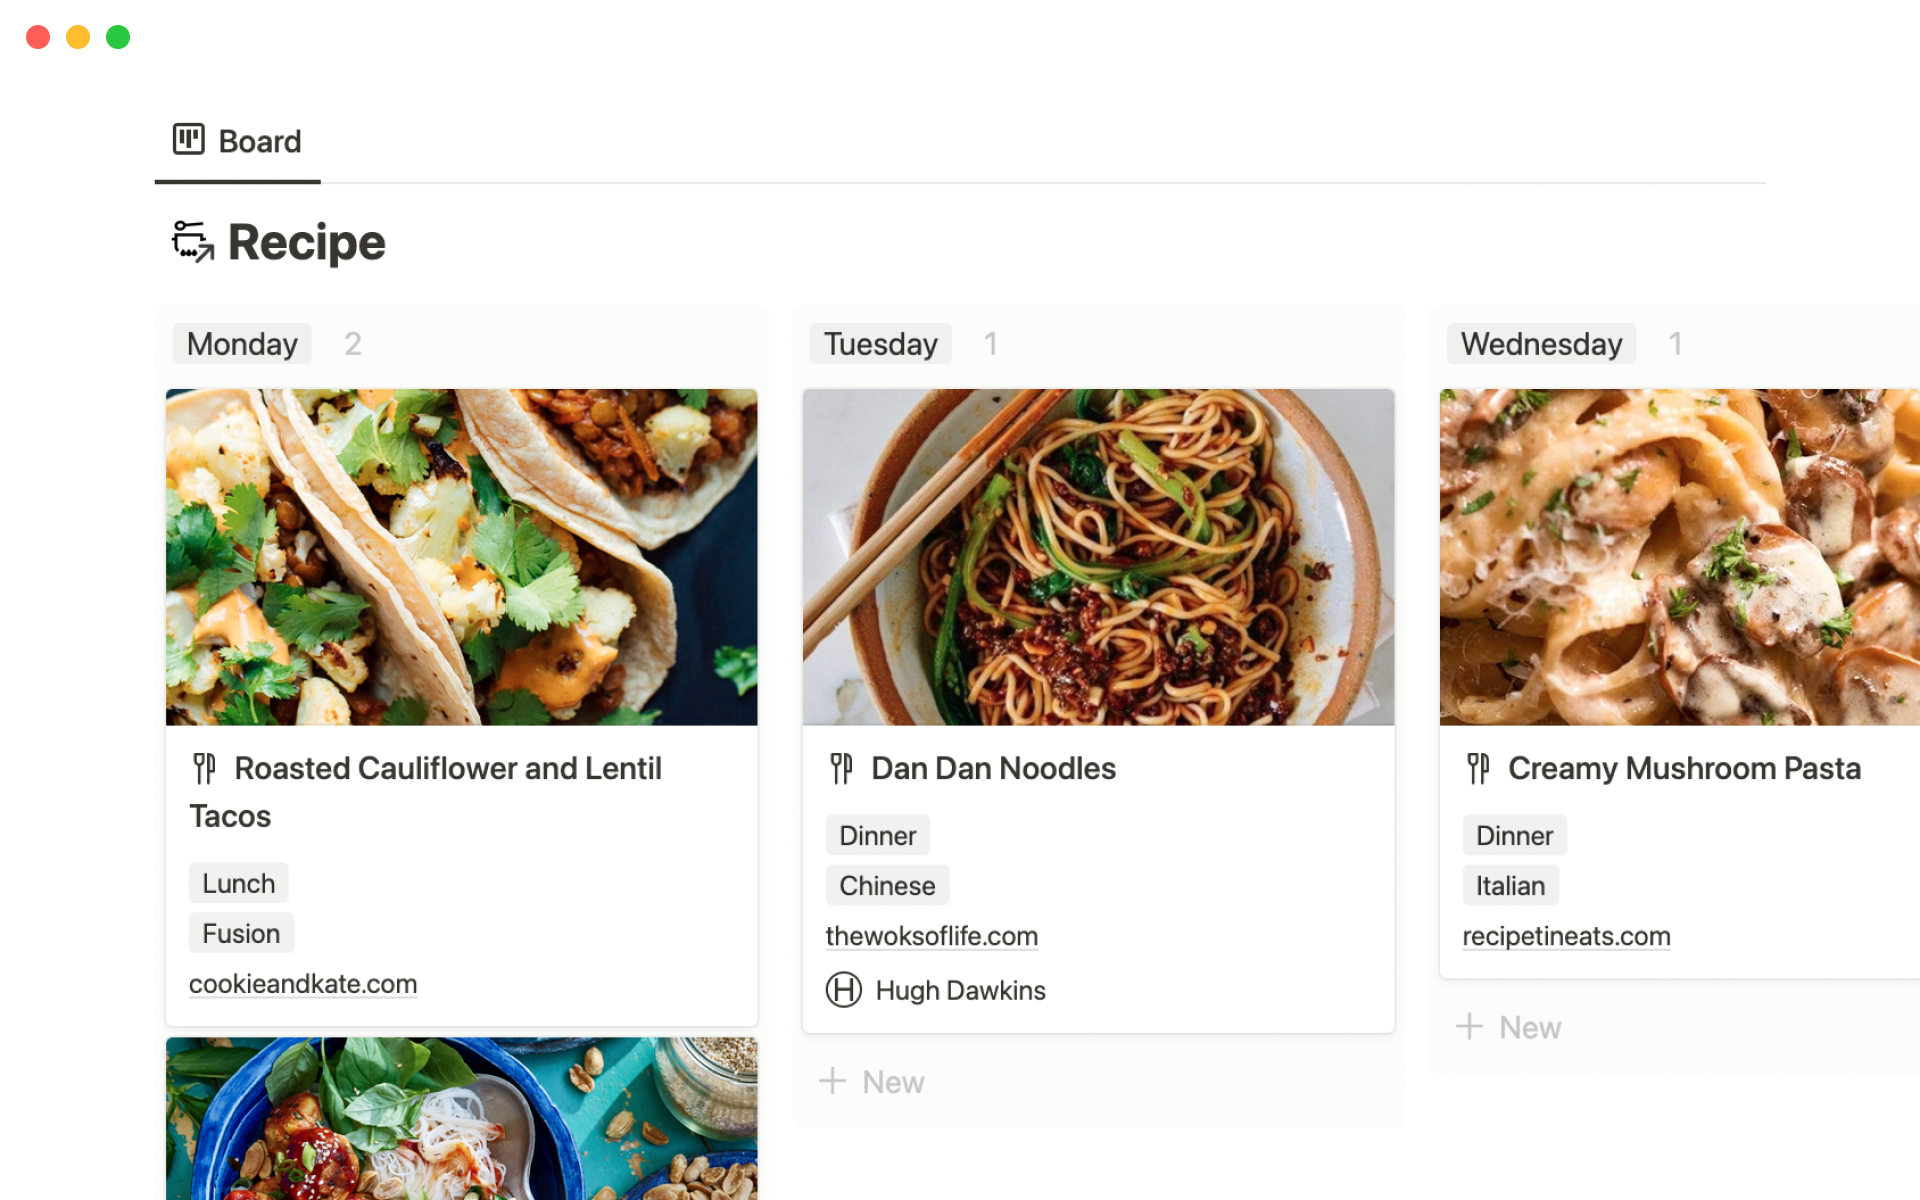 Plan meals, automate your shopping list, and track your ingredients.